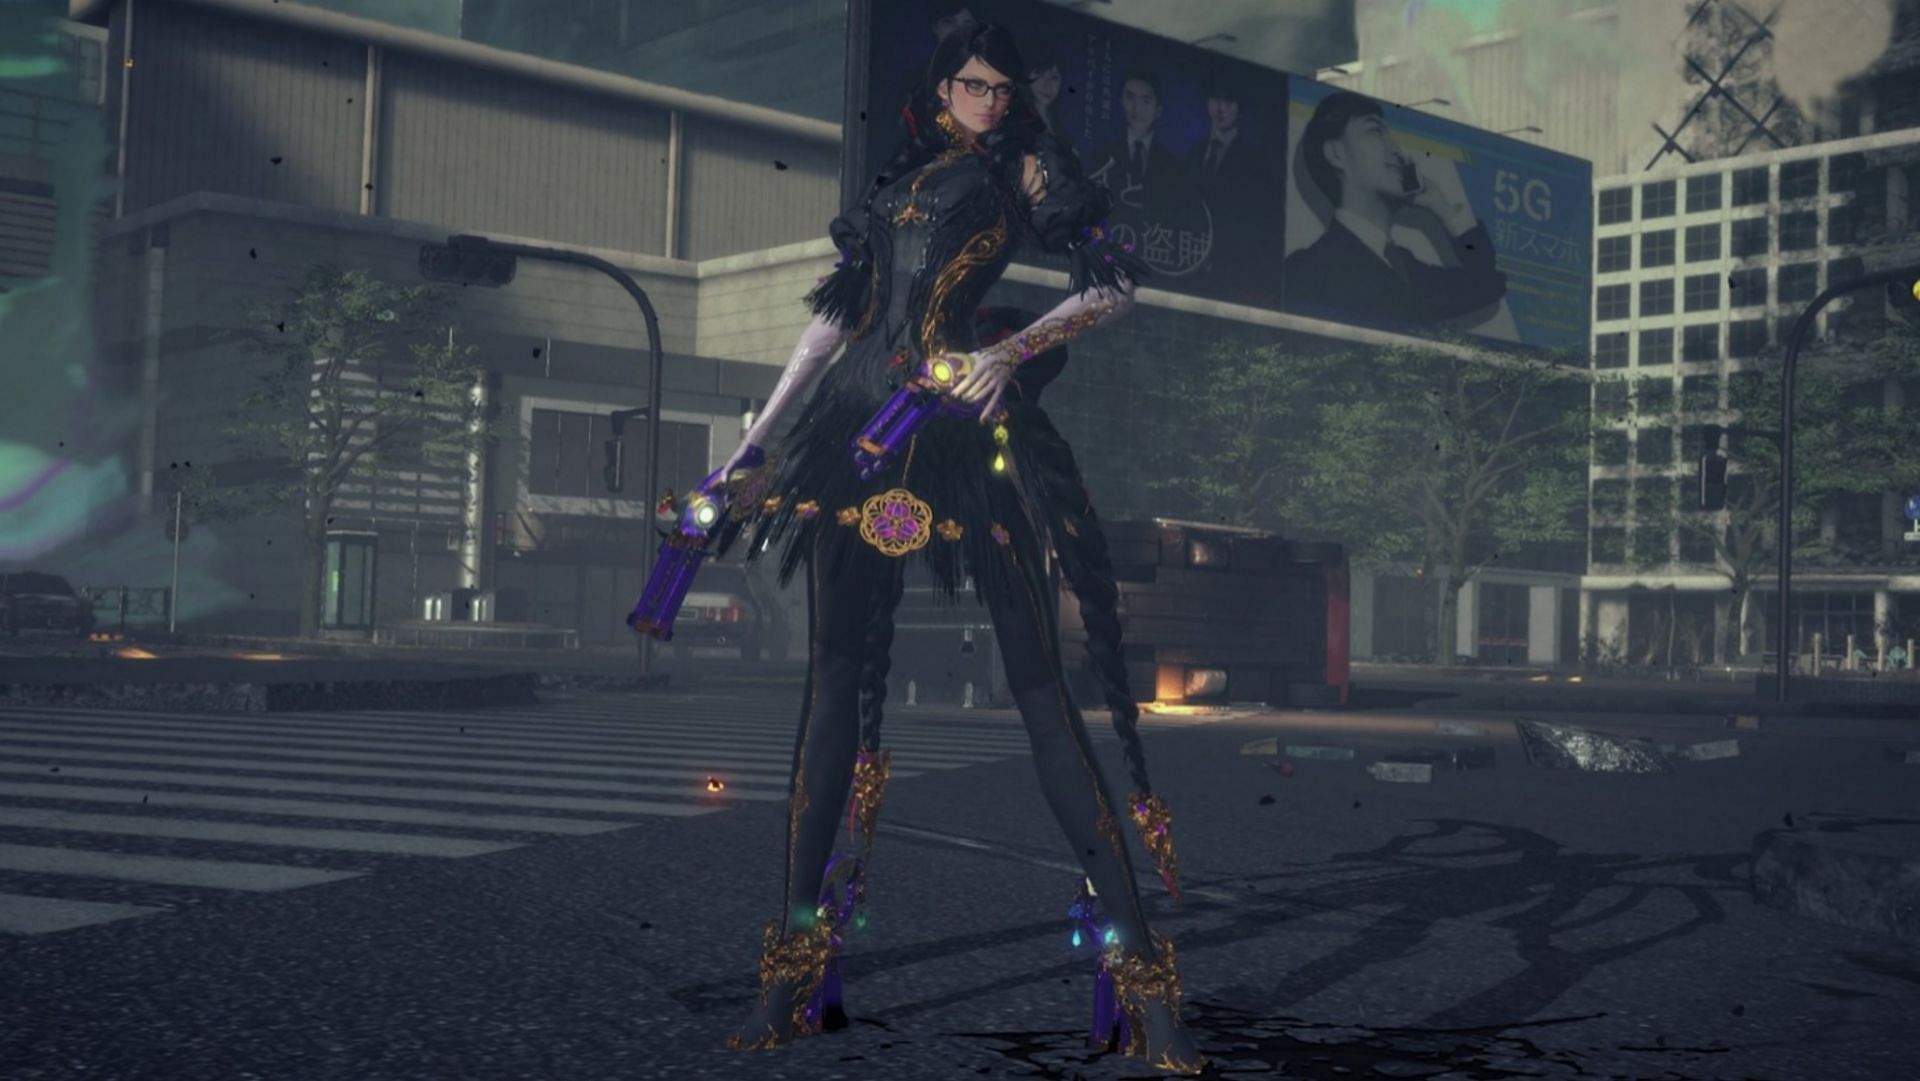 Bayonetta 3 may not be high on length, but it does not skimp on the action (Image via PlatinumGames)